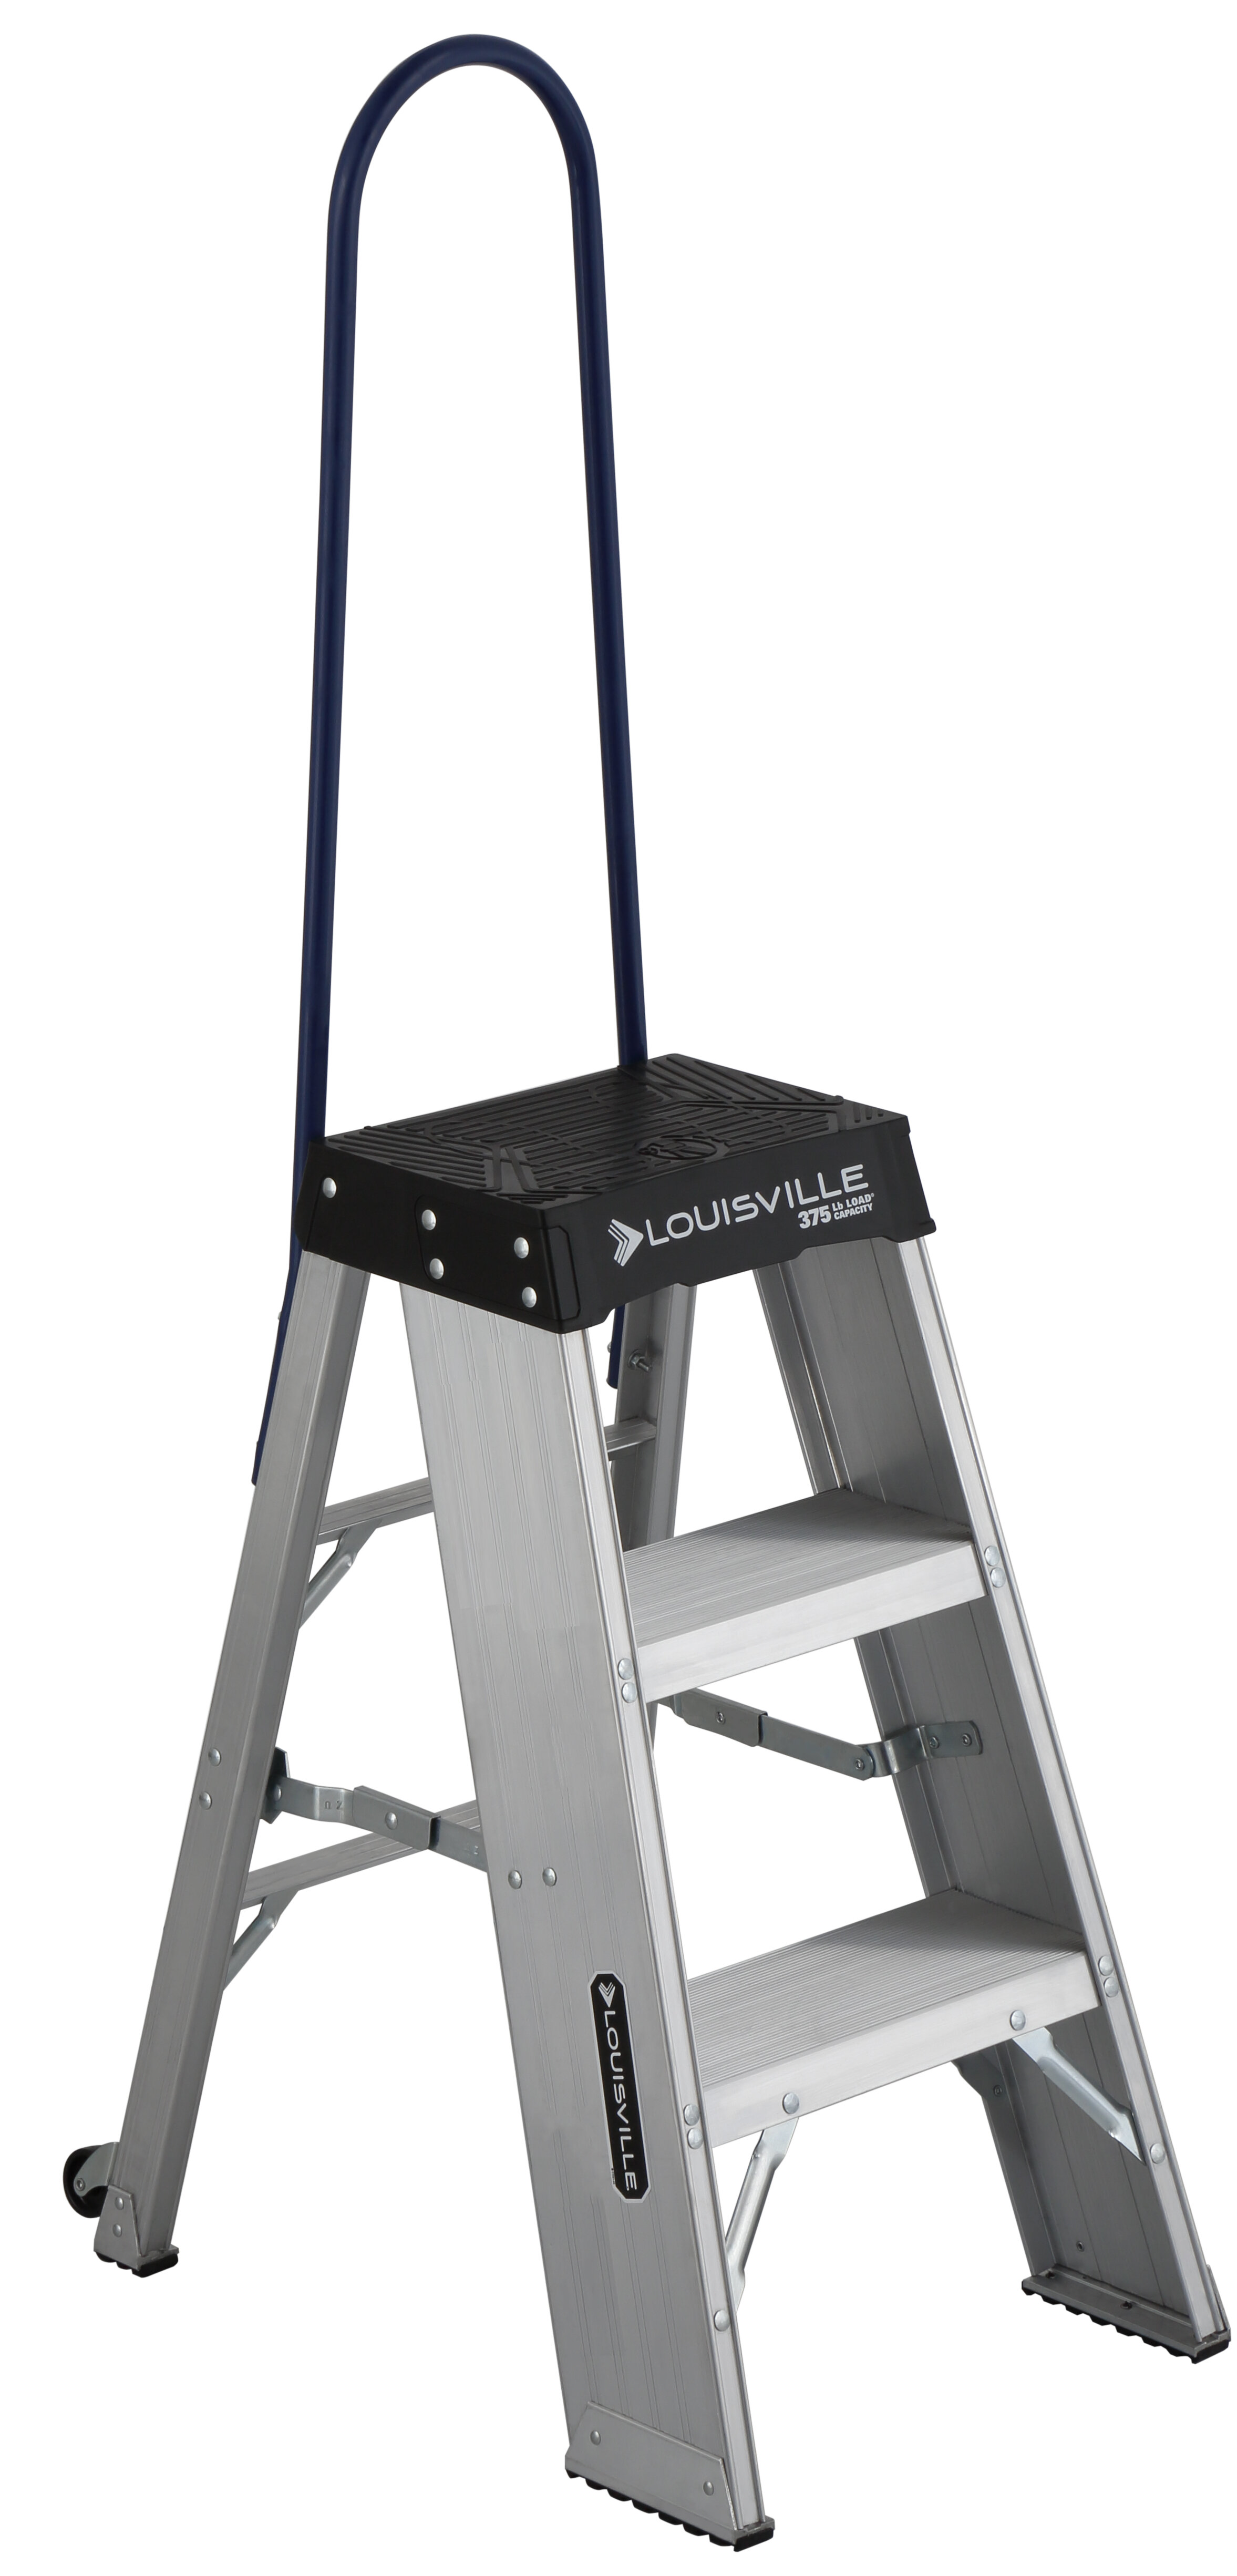 Are aluminum ladders osha approved